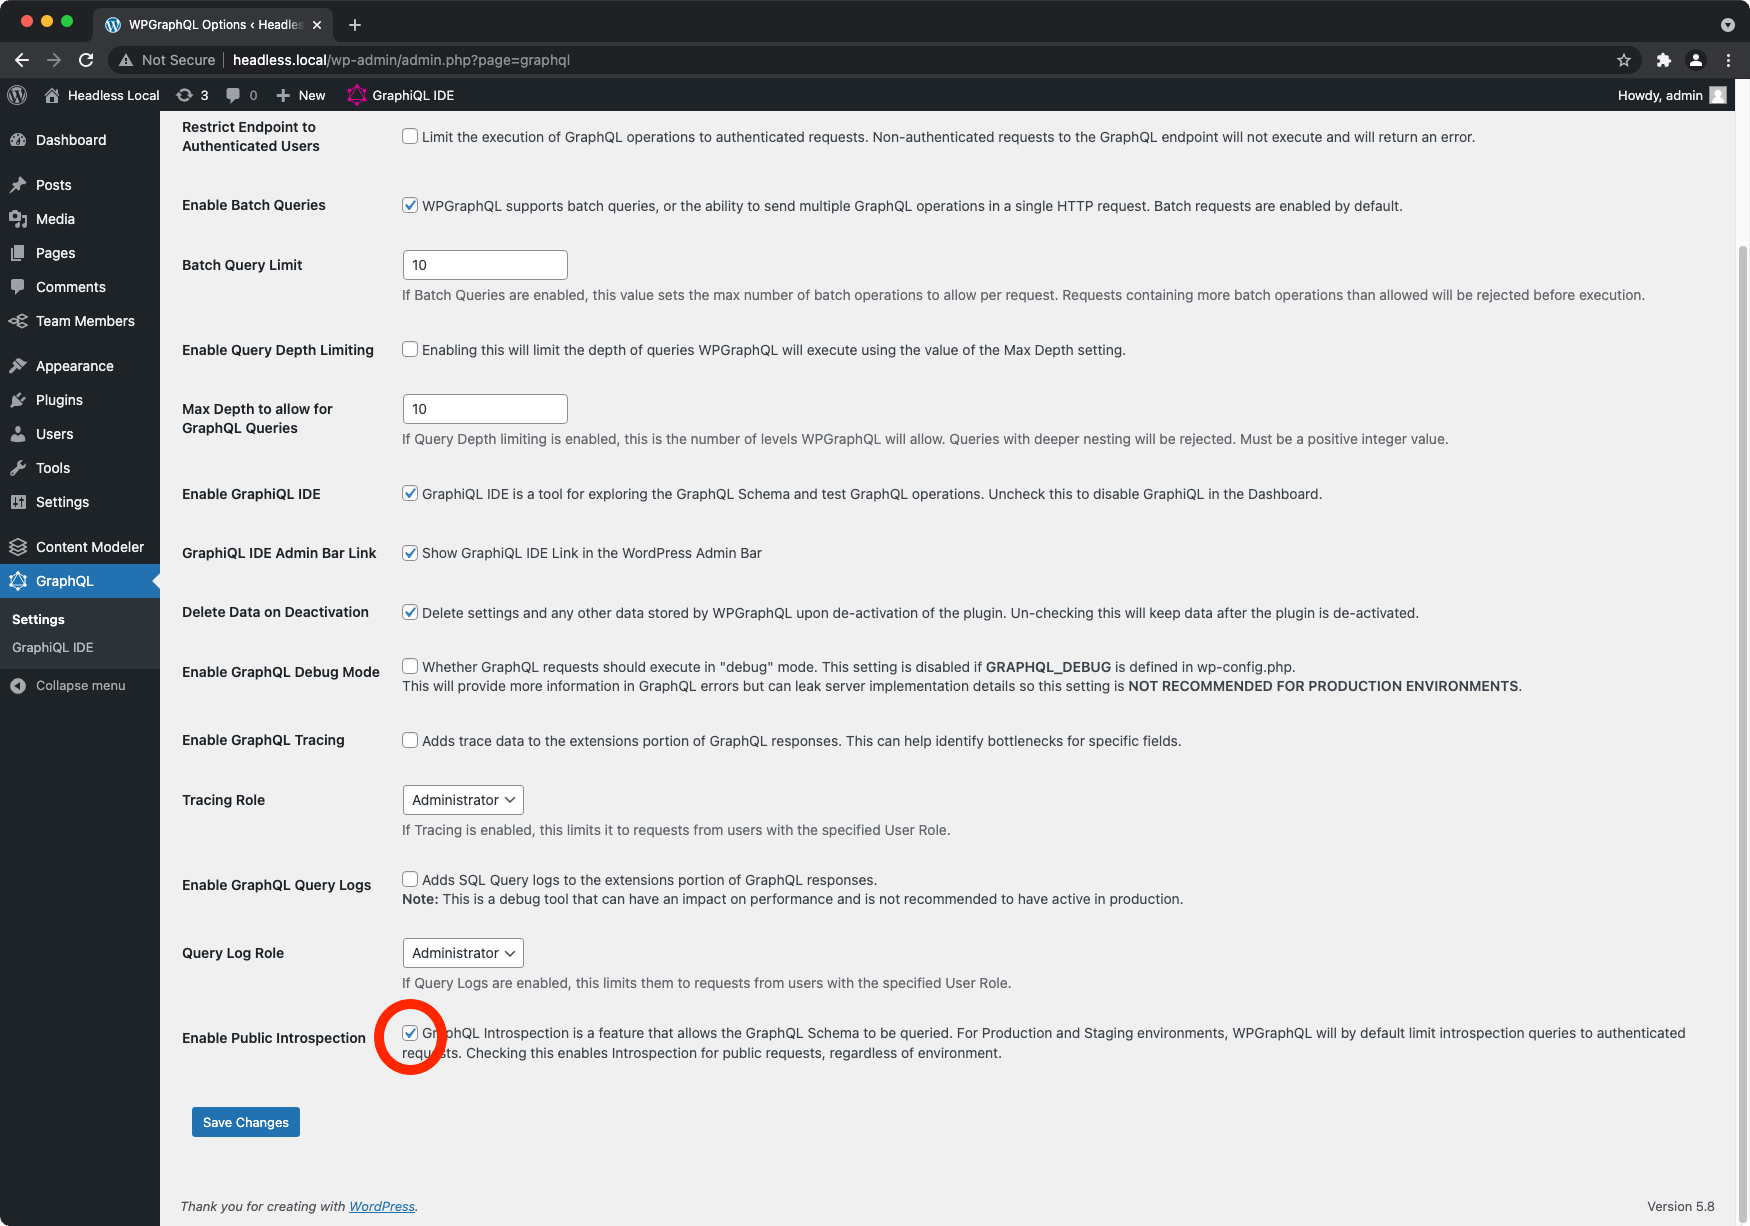 The WPGraphQL settings page with a red circle around the Public Introspection option